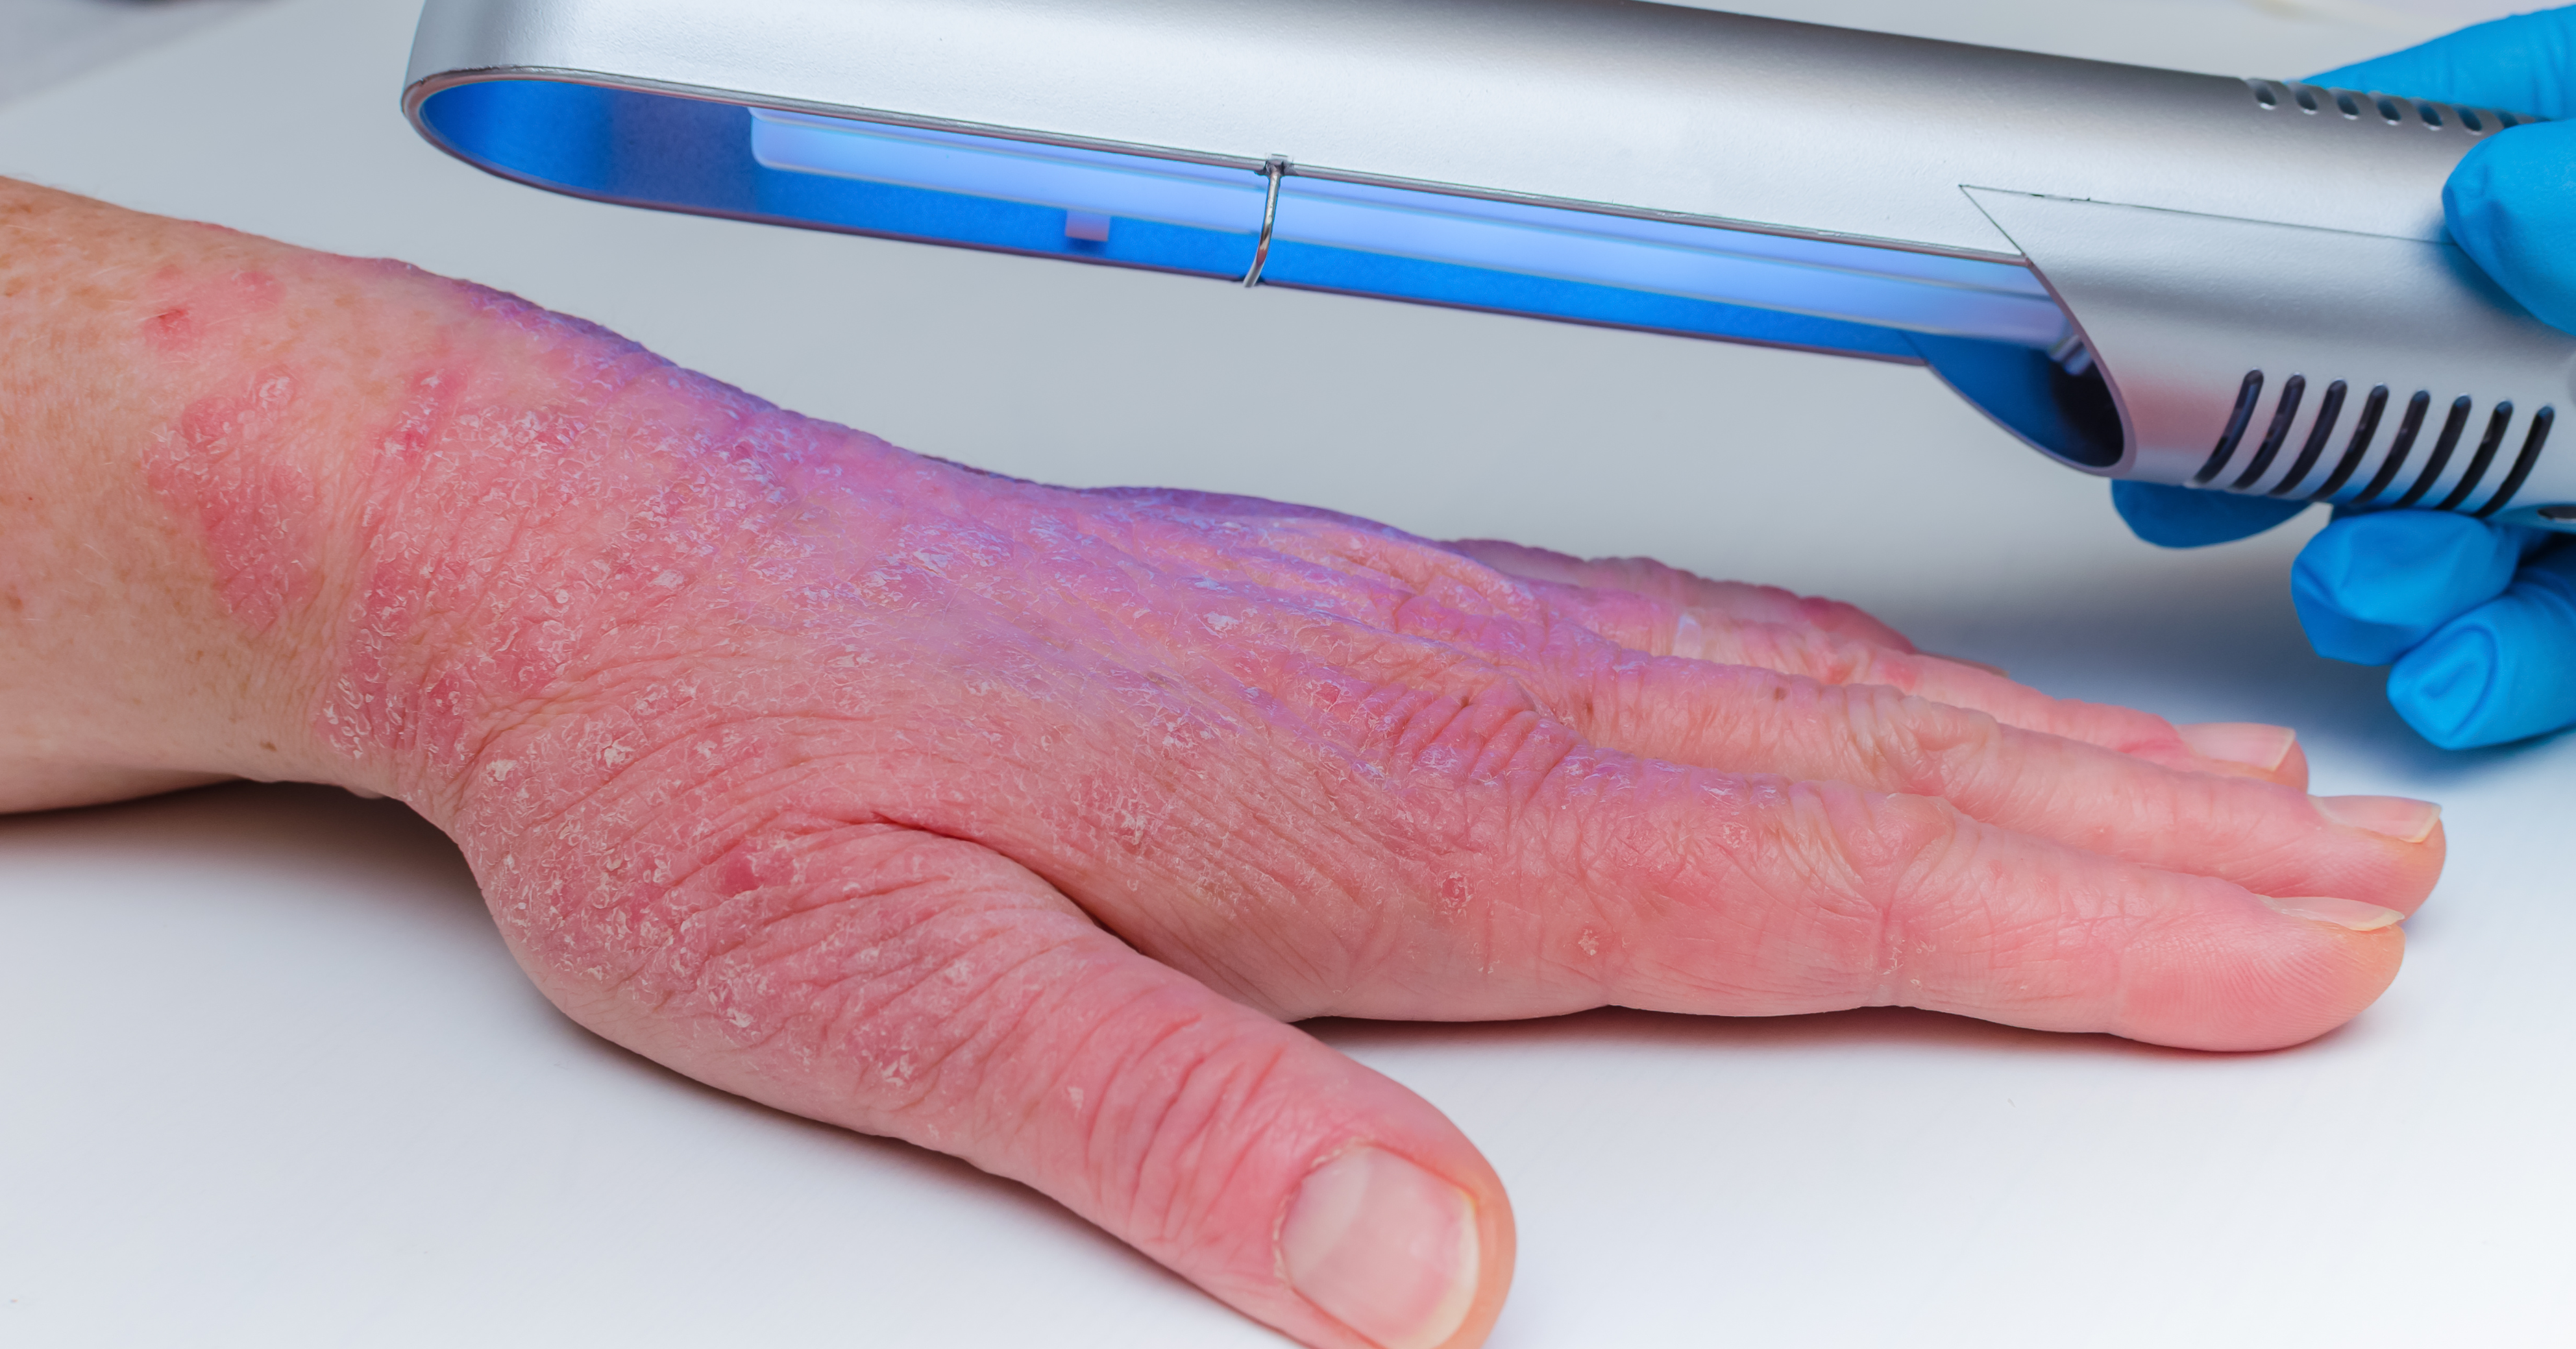 UV light therapy on hand with psoriasis